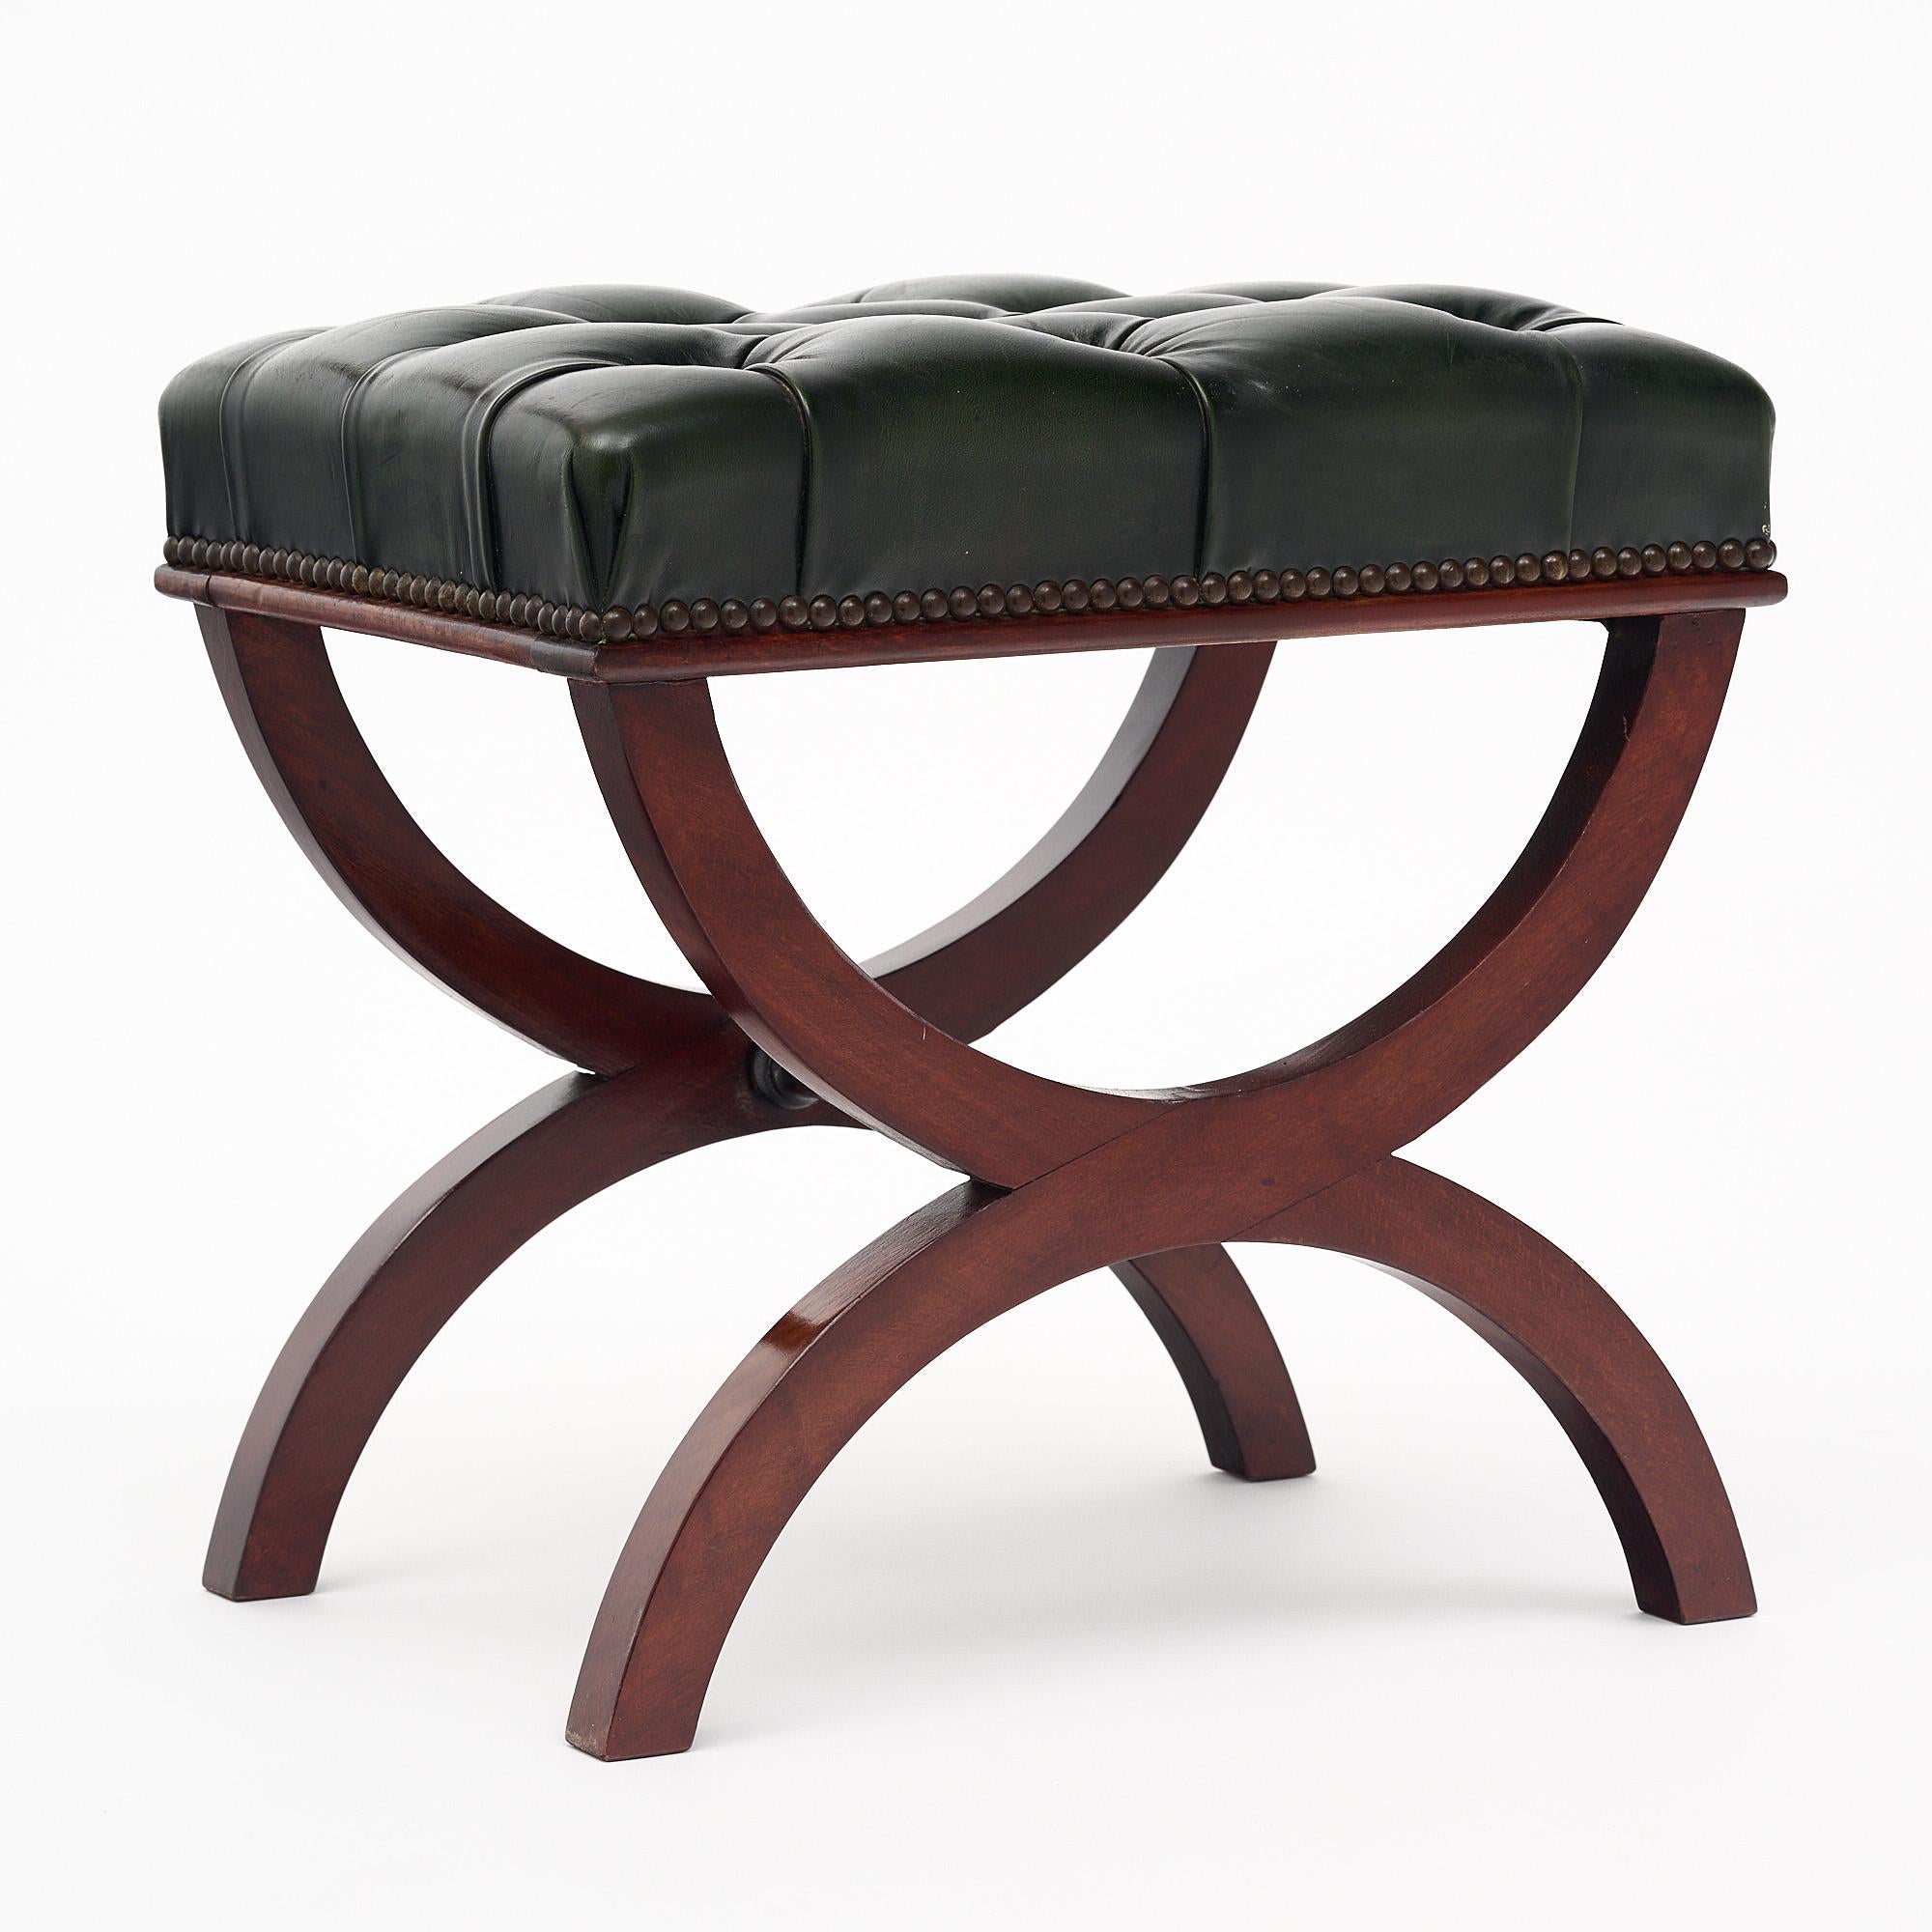 Curule stool from France made with a hand-carved solid mahogany base and original tufted leather upholstery. The upholstery features the original brass nailhead trim as well. We love the classical details of the piece and the quality craftsmanship.
